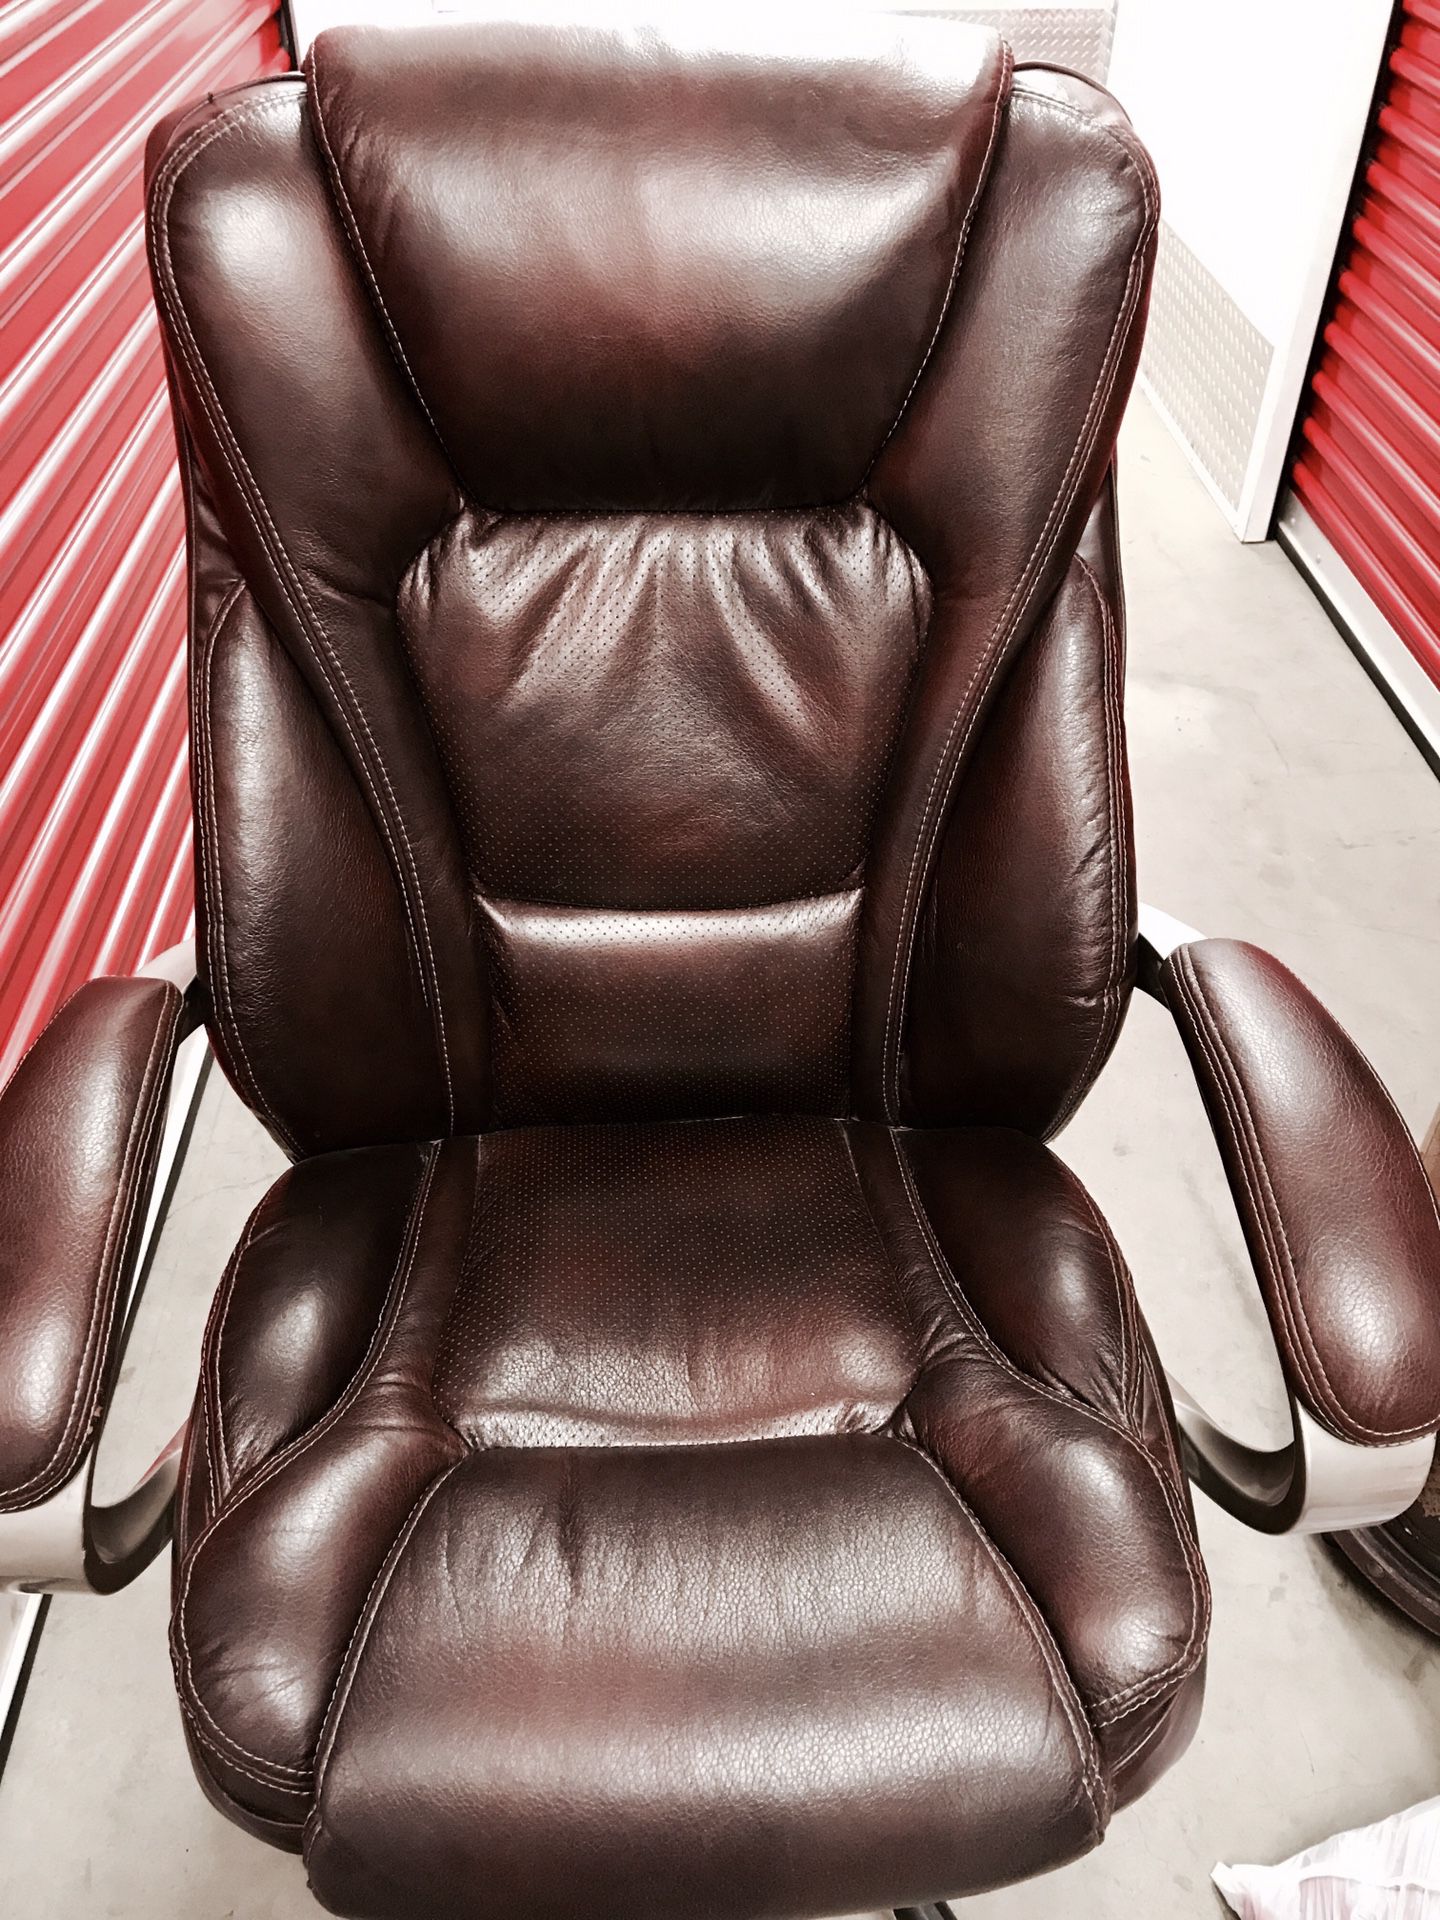 Espresso leather executive chair